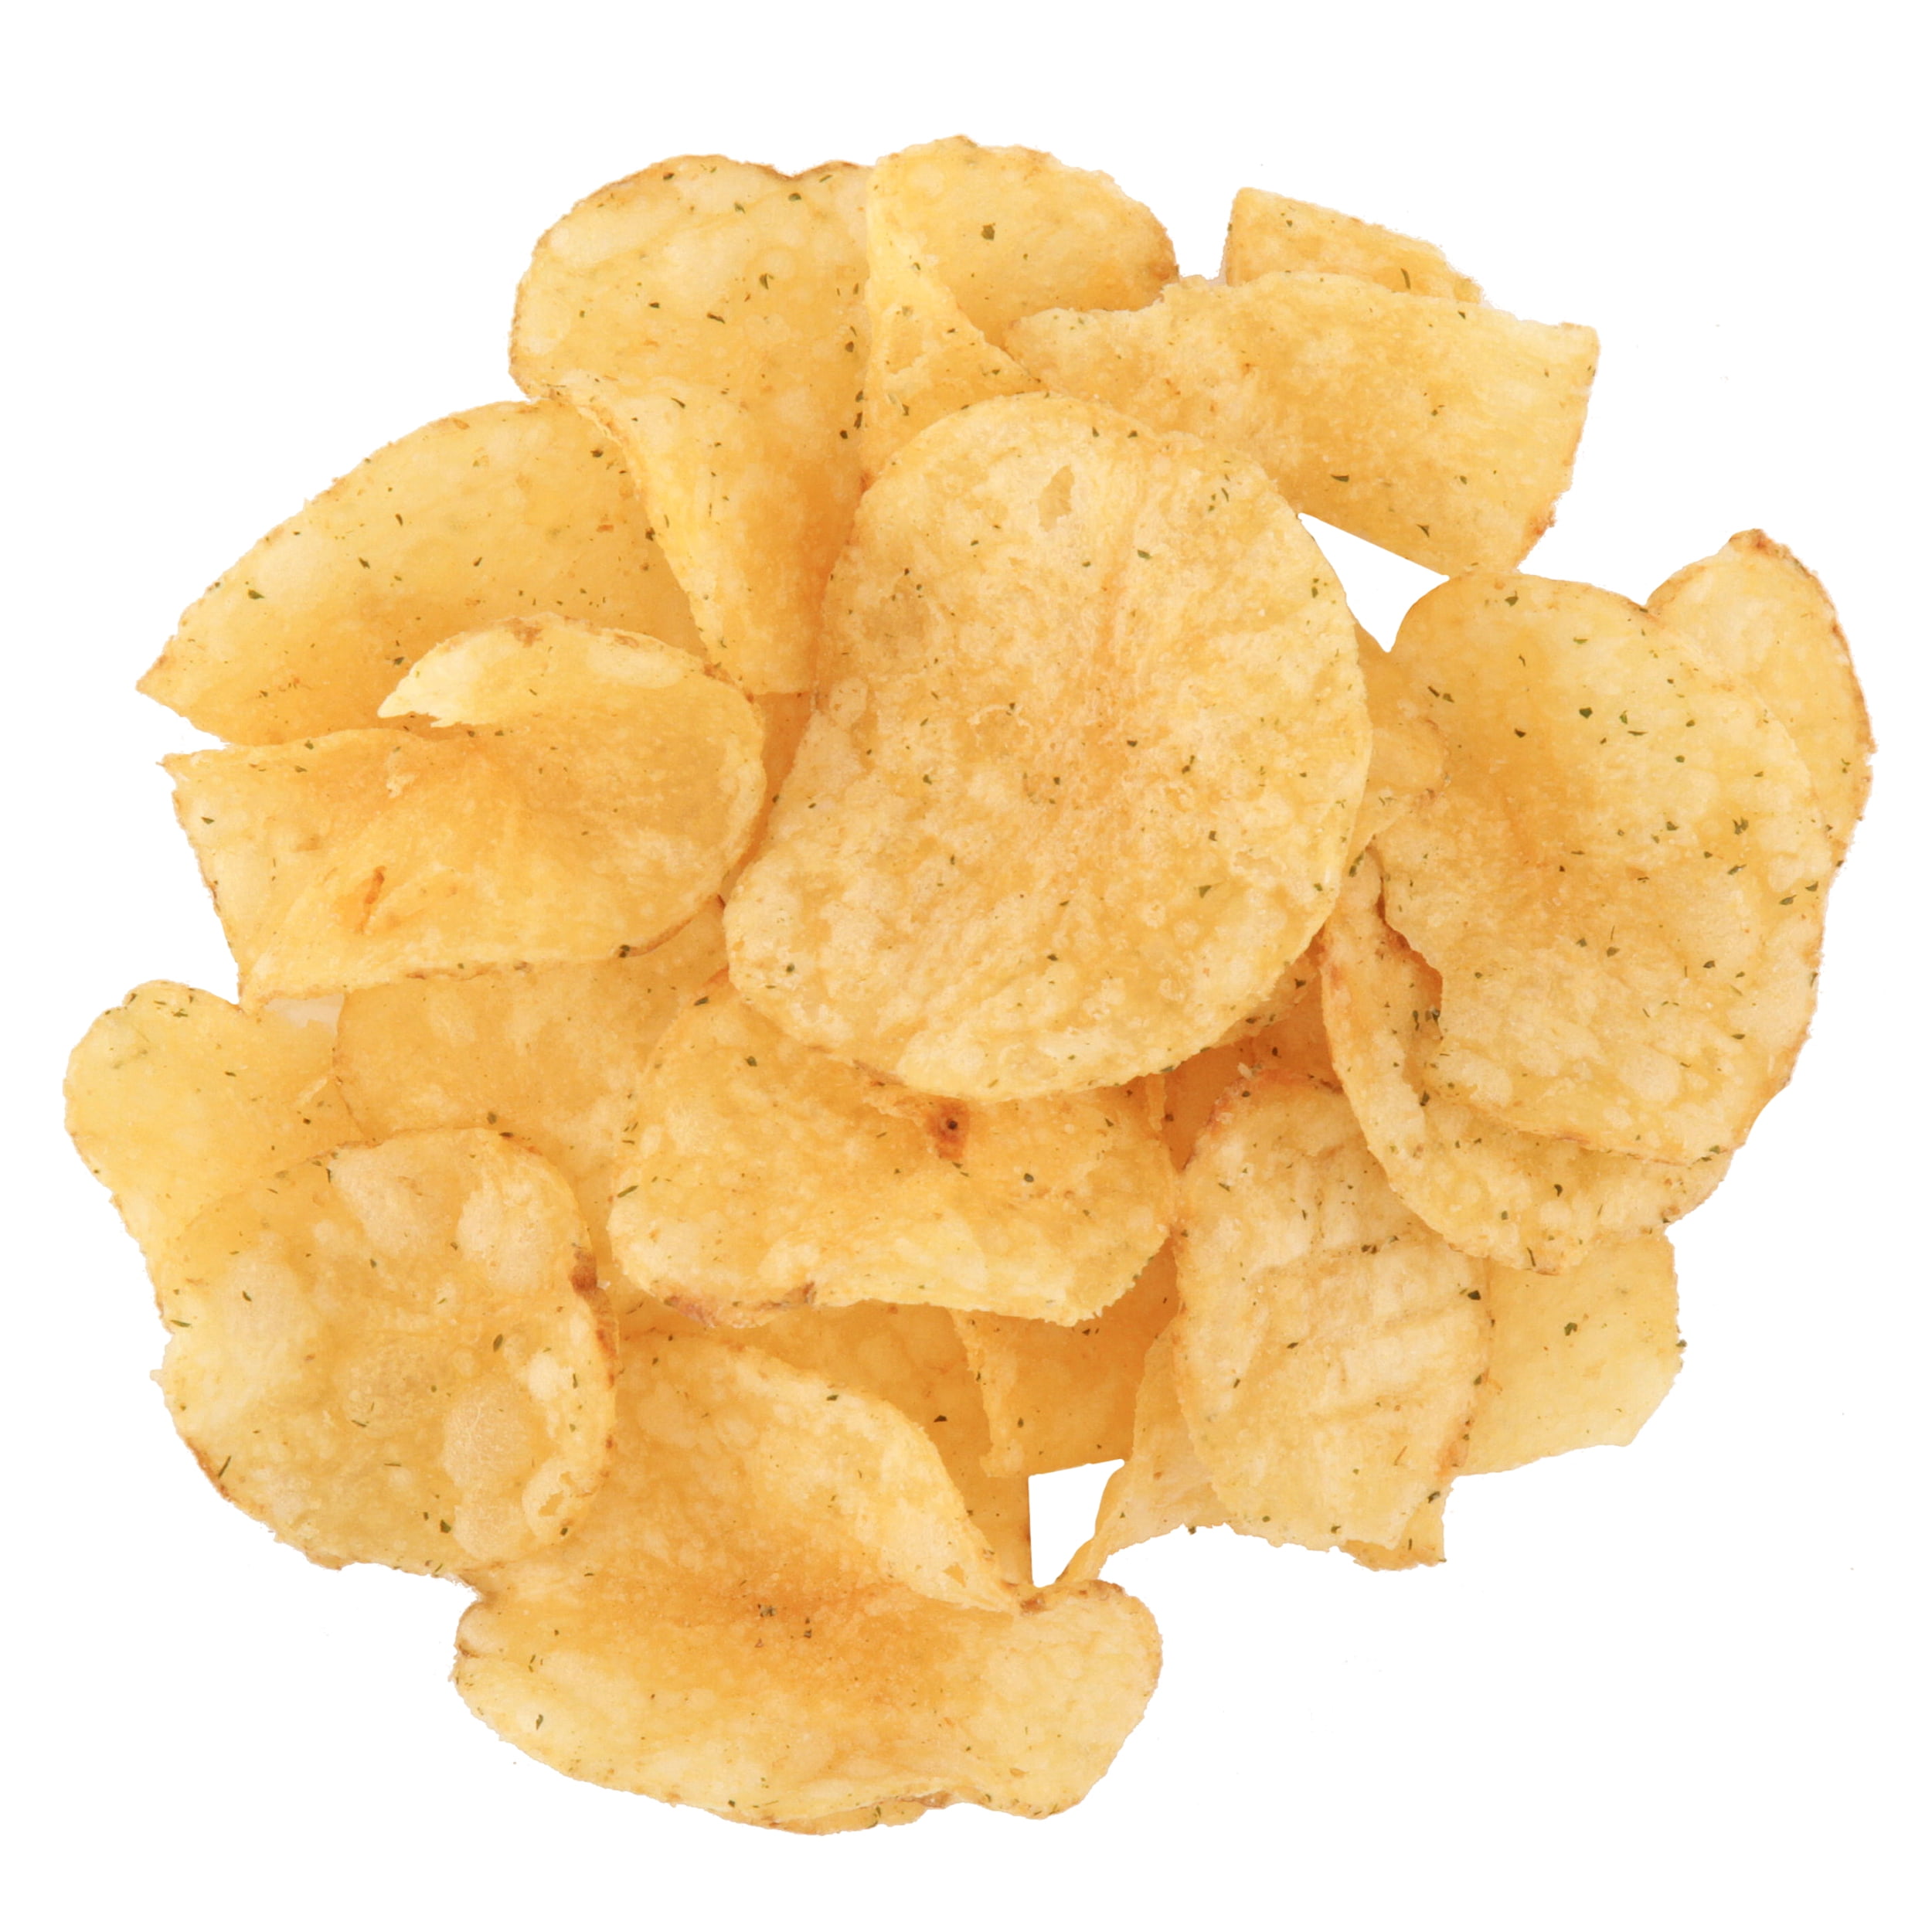 Sour Cream & Onion - North Fork Chips - The Most Delicious Kettle